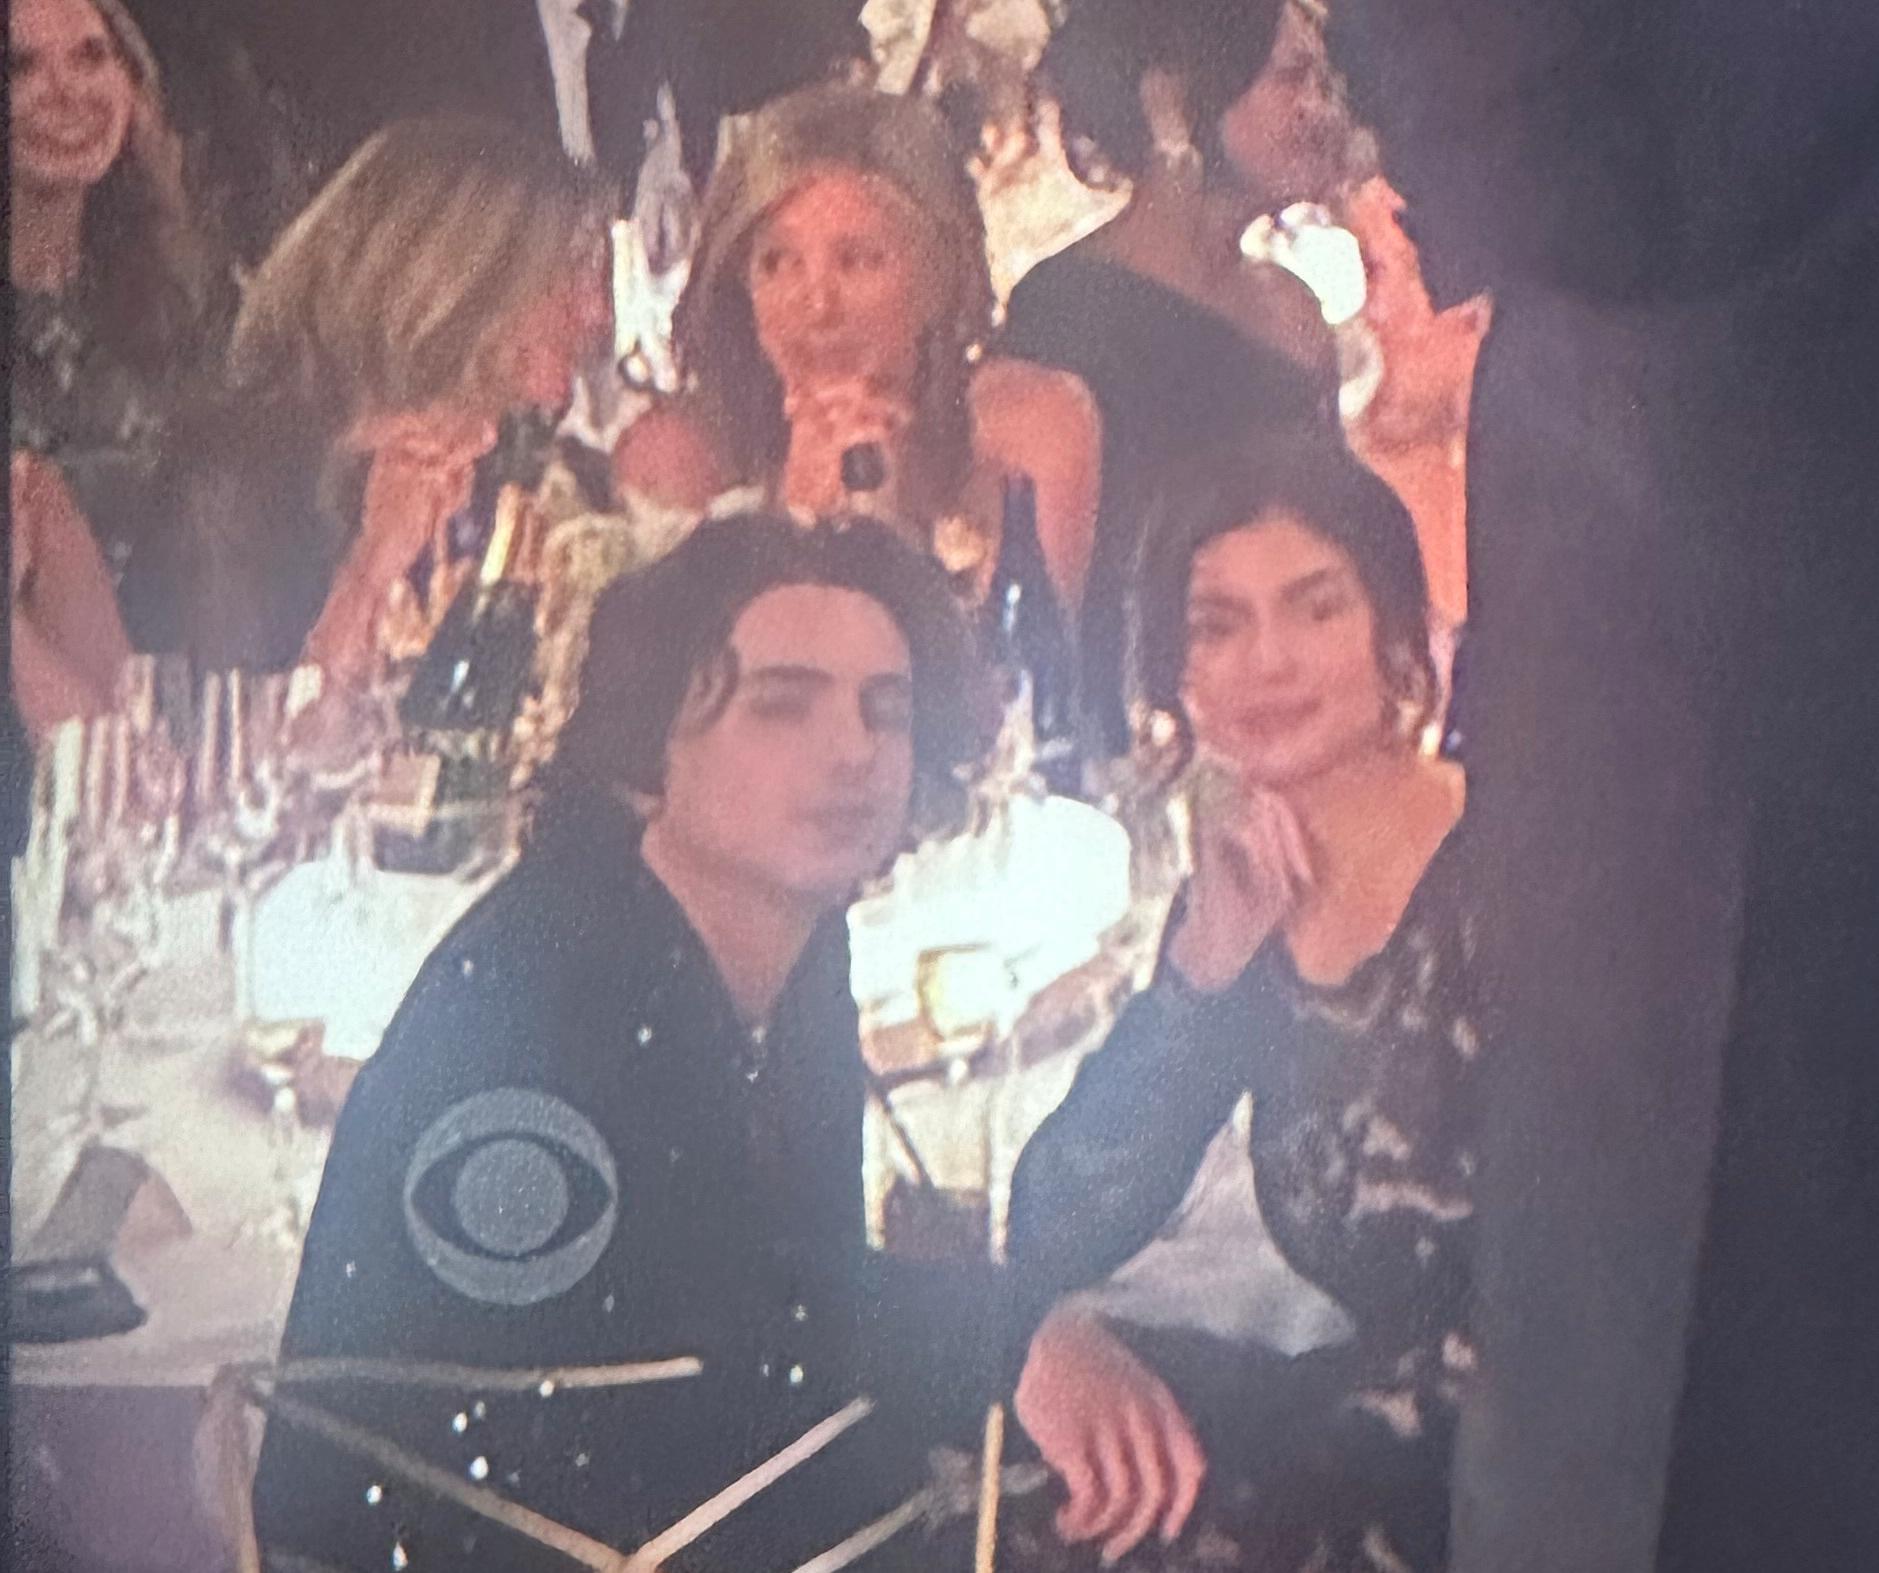 Timothee Chalamet and Kylie Jenner together at the Golden Globe Awards